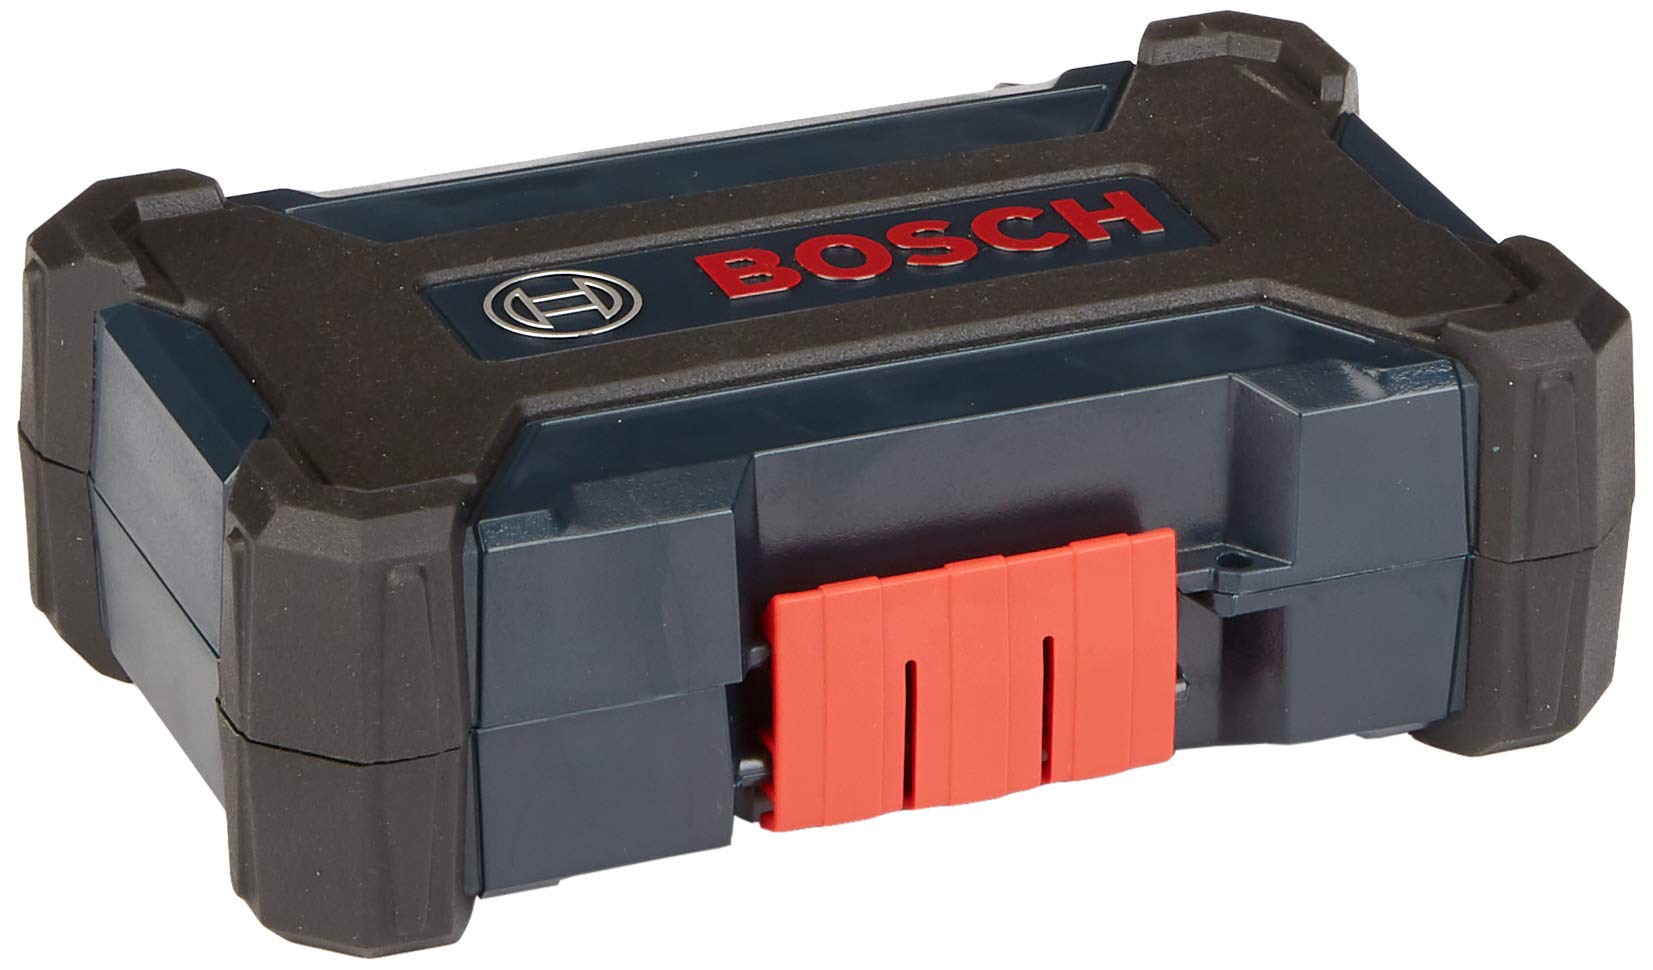 BOSCH DDMS40 40-Piece Assorted Impact Tough Drill Drive Custom Case System Set for Drilling and Driving Applications